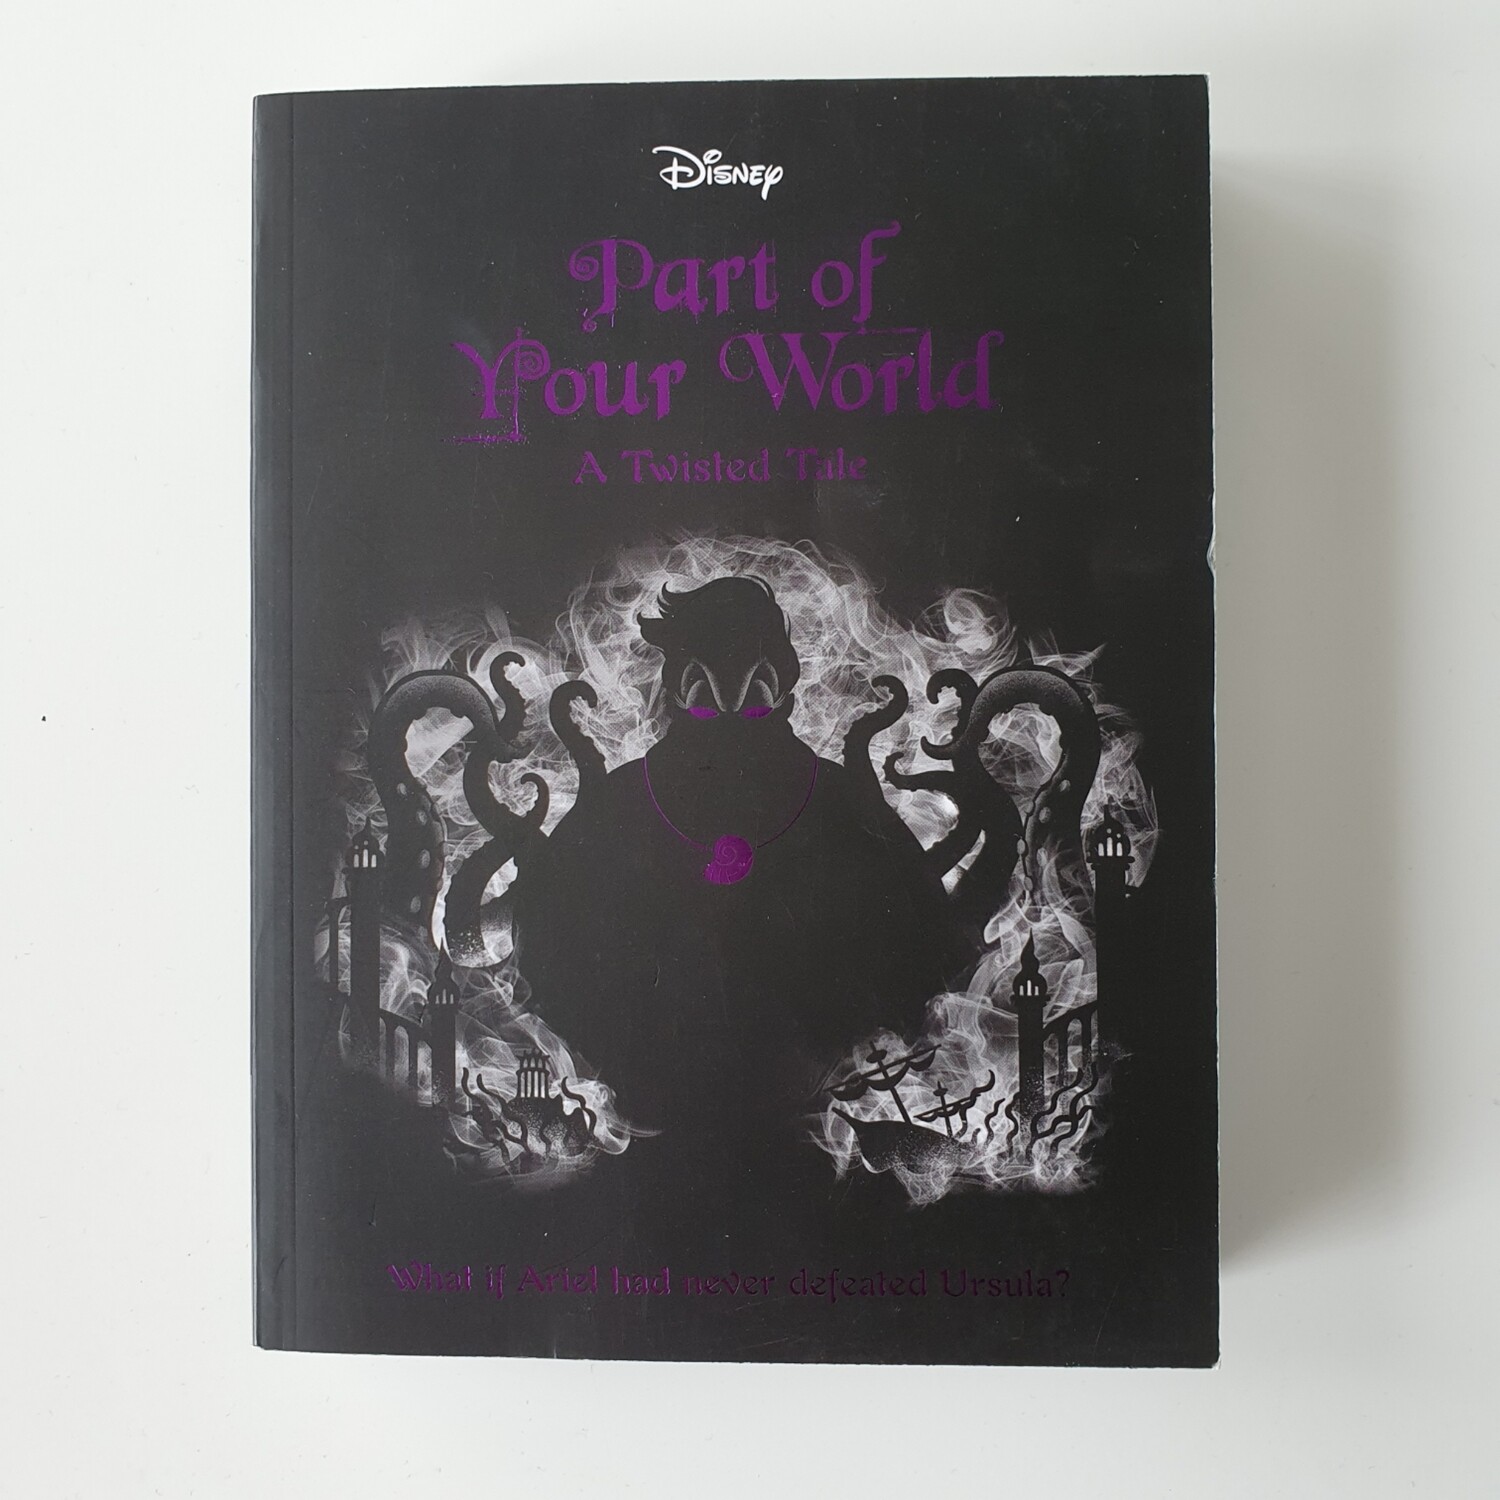 Ursula - Part of Your World - A Twisted Tale, Disney Notebook - made from a paperback book, comes with book corners, Little Mermaid